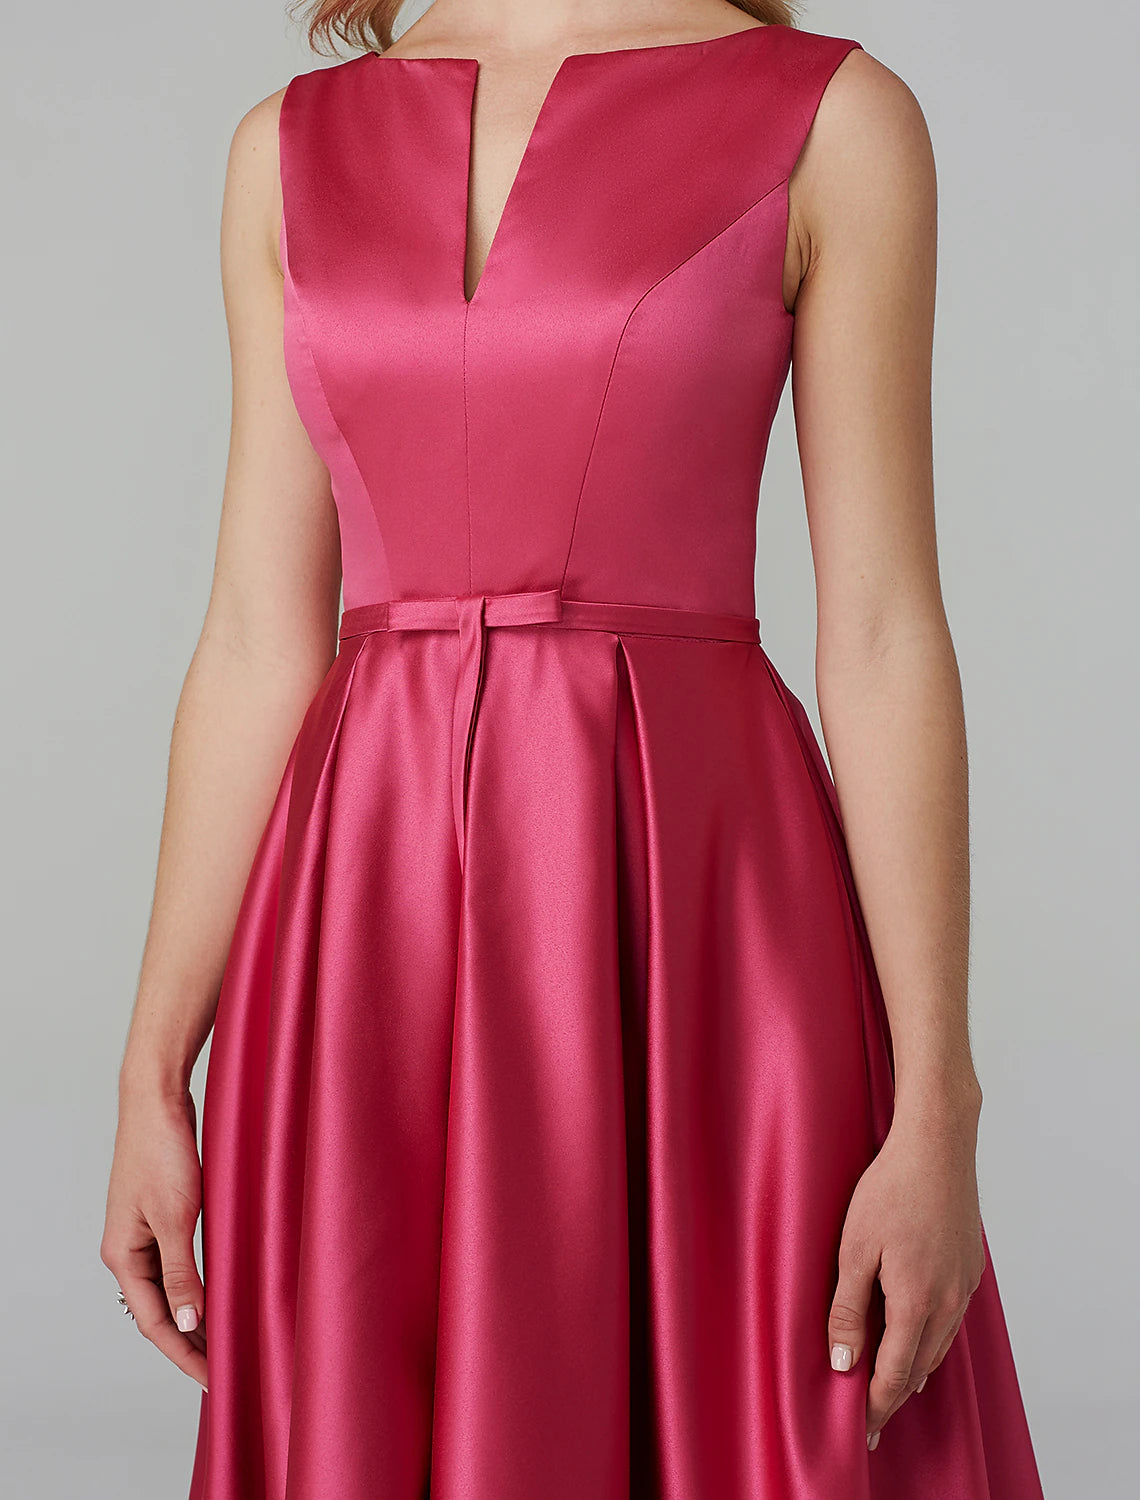 A-Line Party Dress Wedding Guest Cocktail Party Knee Length Sleeveless V Wire Pink Dress Satin with Sash / Ribbon